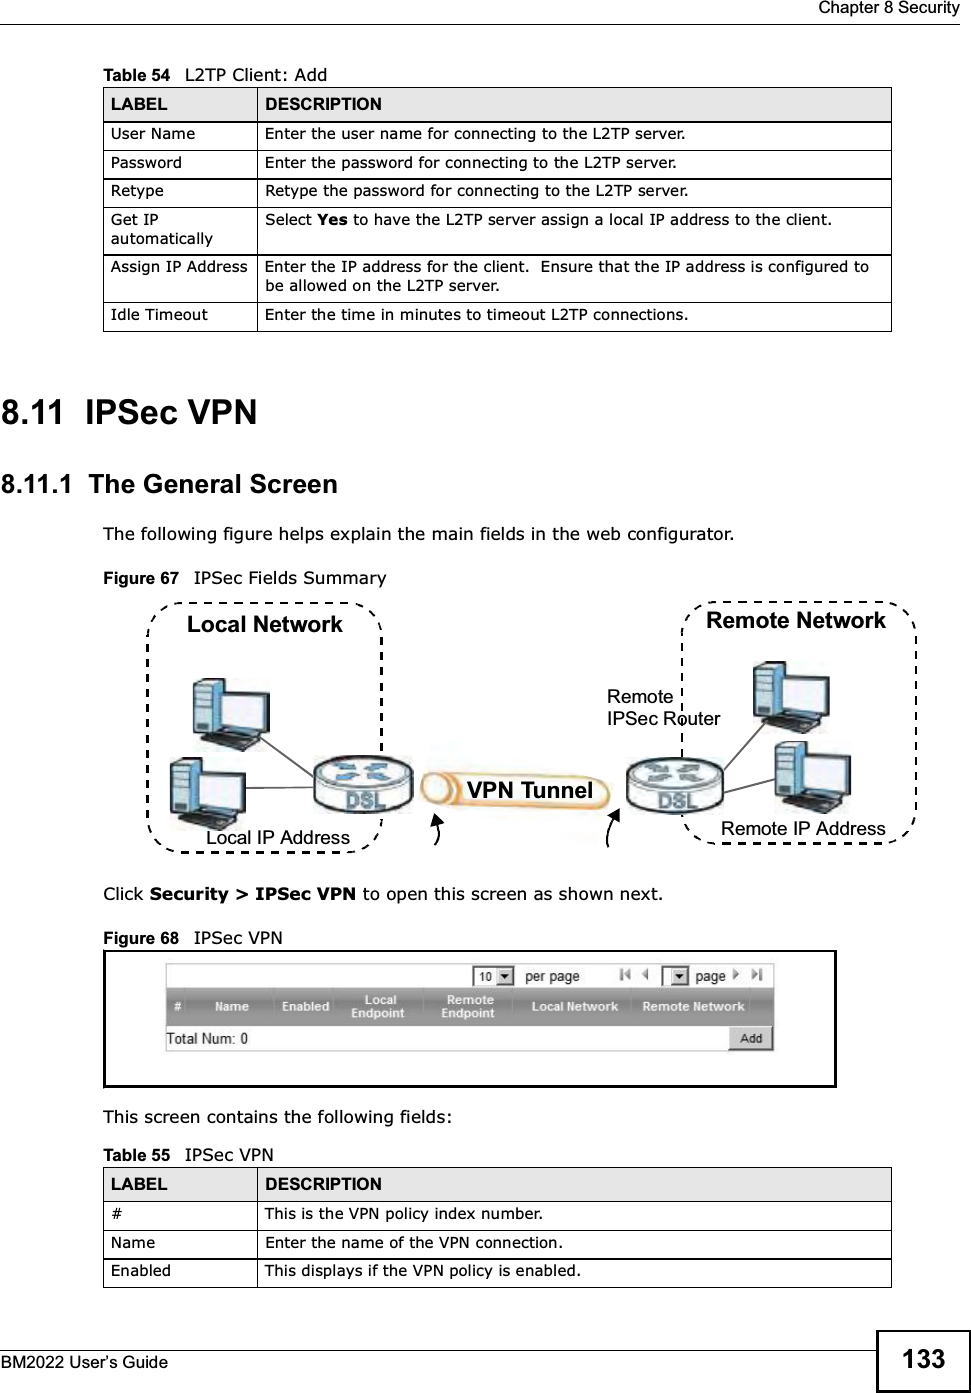  Chapter 8 SecurityBM2022 Users Guide 1338.11  IPSec VPN8.11.1  The General ScreenThe following figure helps explain the main fields in the web configurator.Figure 67   IPSec Fields SummaryClick Security &gt; IPSec VPN to open this screen as shown next.Figure 68   IPSec VPNThis screen contains the following fields:User Name Enter the user name for connecting to the L2TP server.Password Enter the password for connecting to the L2TP server.Retype Retype the password for connecting to the L2TP server.Get IP automaticallySelect Yes to have the L2TP server assign a local IP address to the client.Assign IP Address Enter the IP address for the client.  Ensure that the IP address is configured to be allowed on the L2TP server.Idle Timeout Enter the time in minutes to timeout L2TP connections.Table 54   L2TP Client: AddLABEL DESCRIPTIONTable 55   IPSec VPNLABEL DESCRIPTION# This is the VPN policy index number. Name Enter the name of the VPN connection.Enabled This displays if the VPN policy is enabled.Local NetworkLocal IP AddressRemote NetworkRemote IP AddressRemote IPSec RouterVPN Tunnel